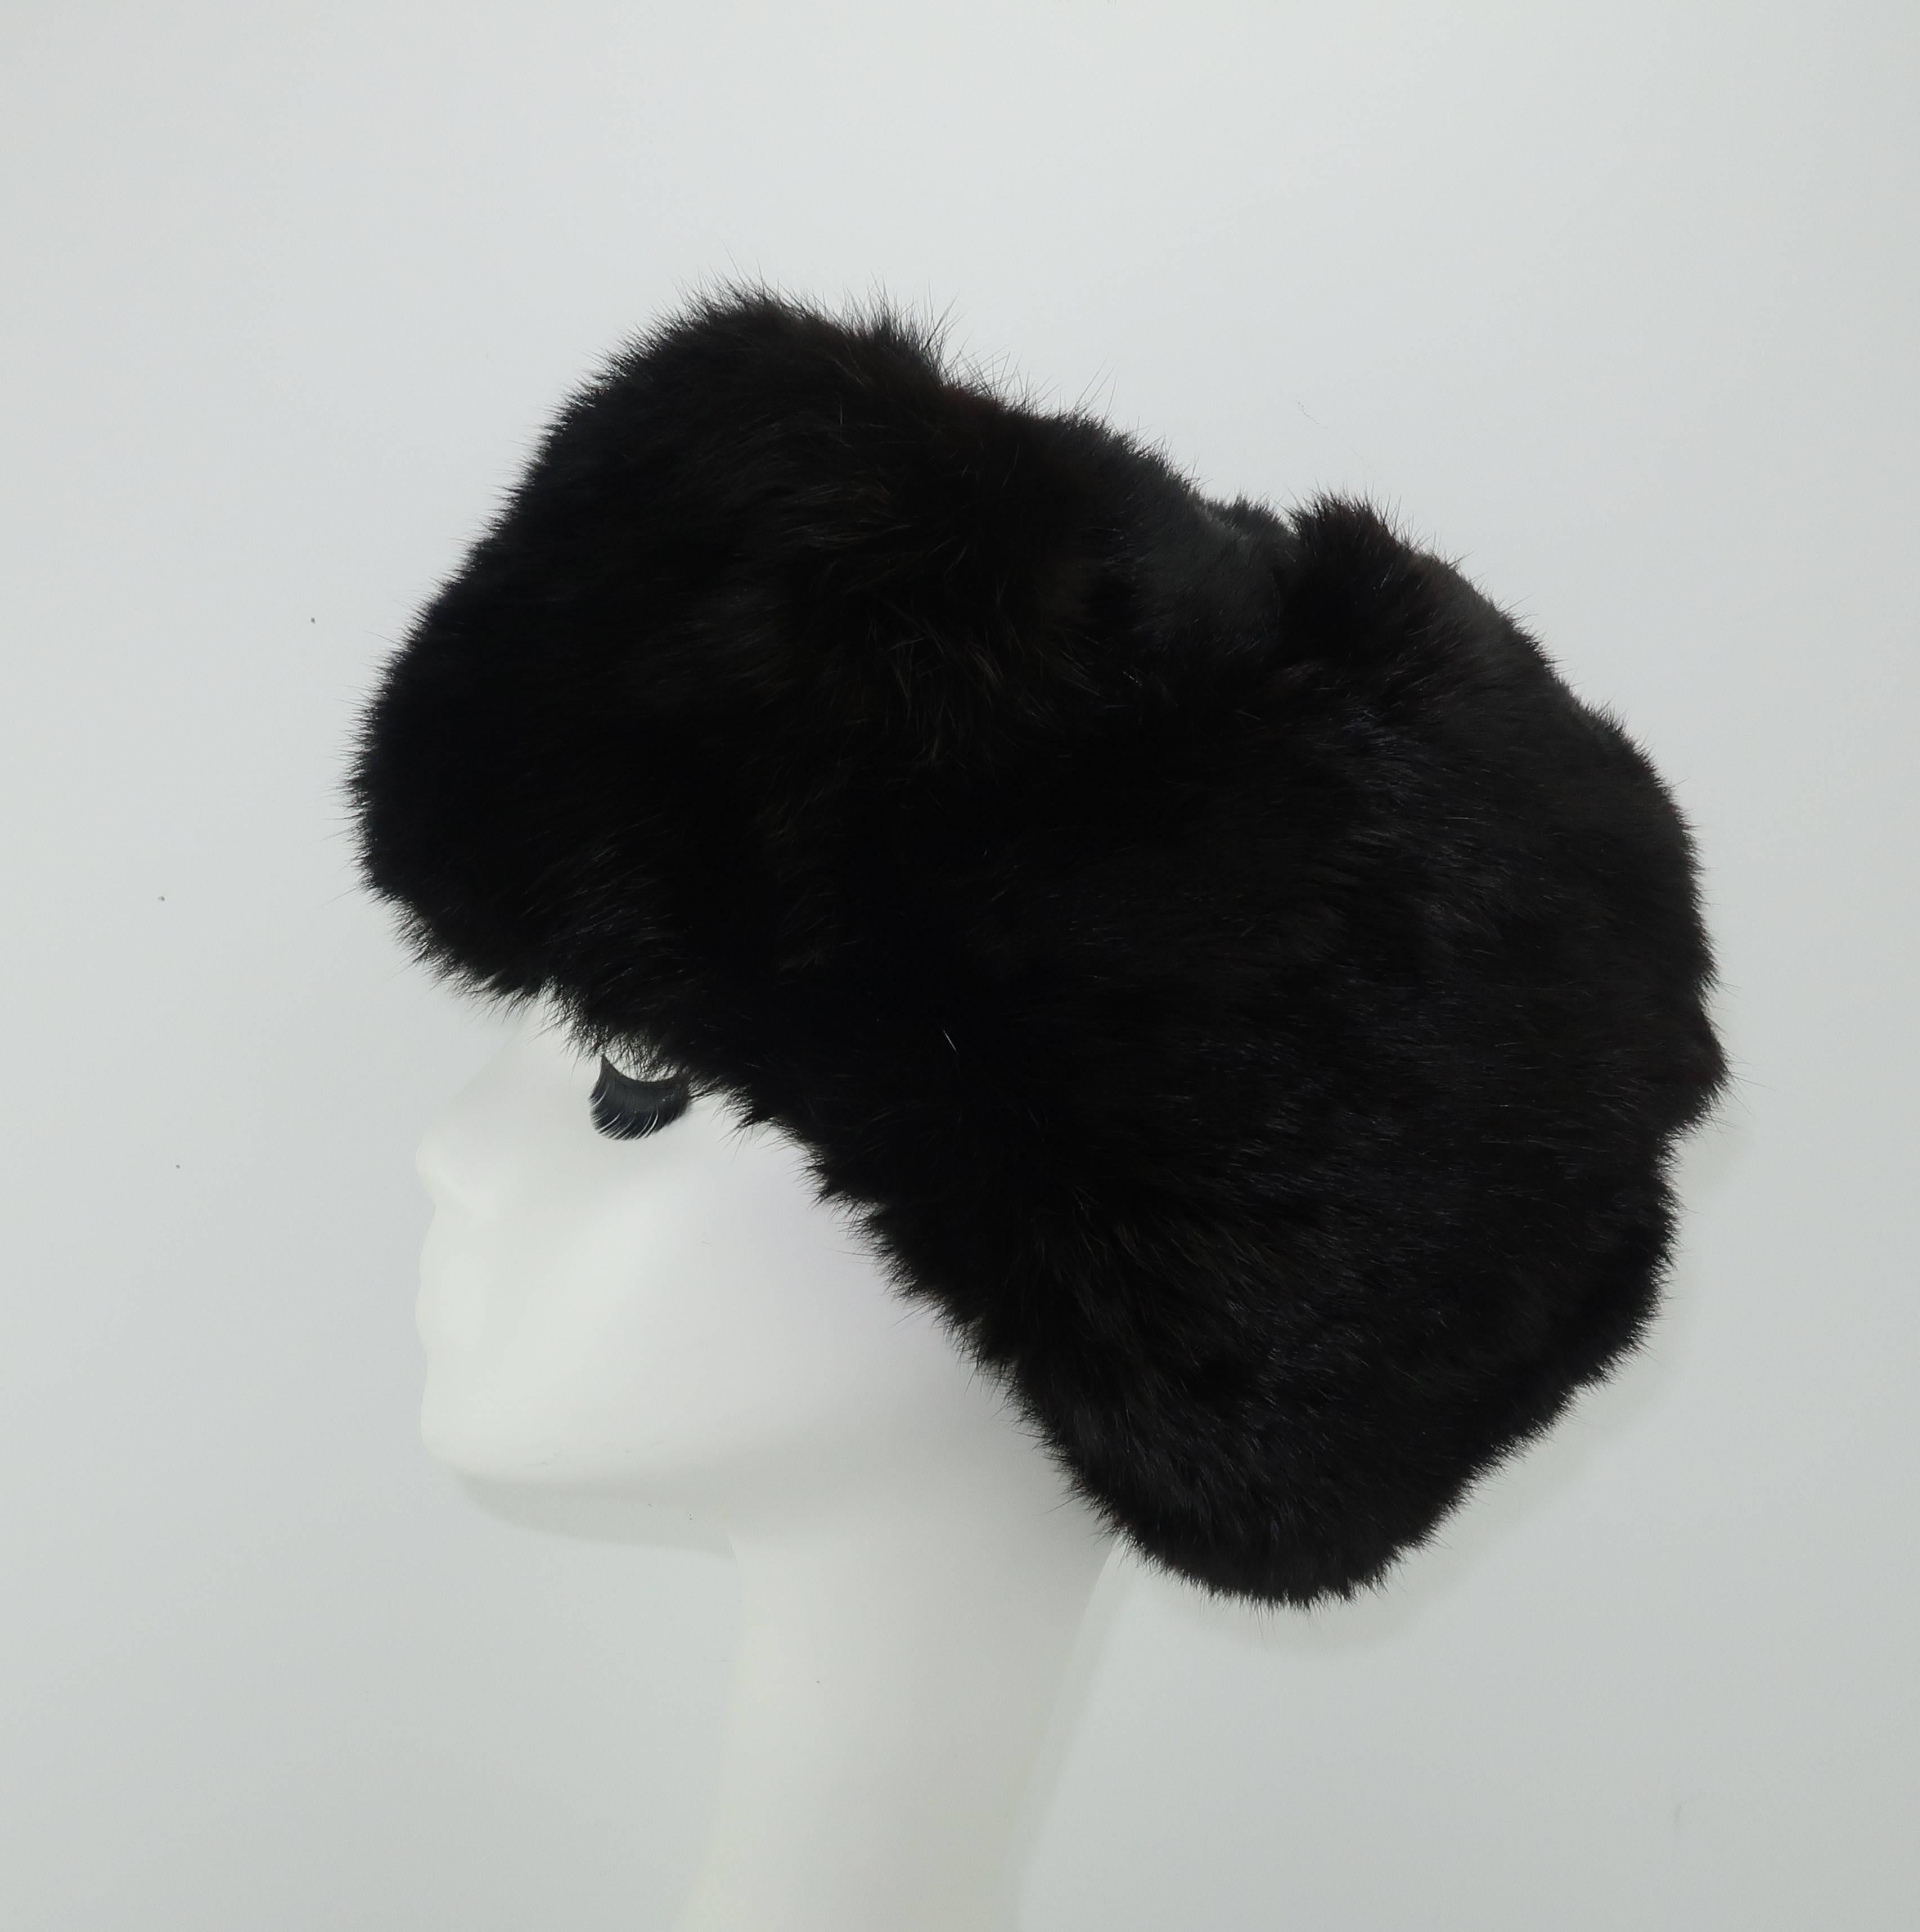 sable hats for sale